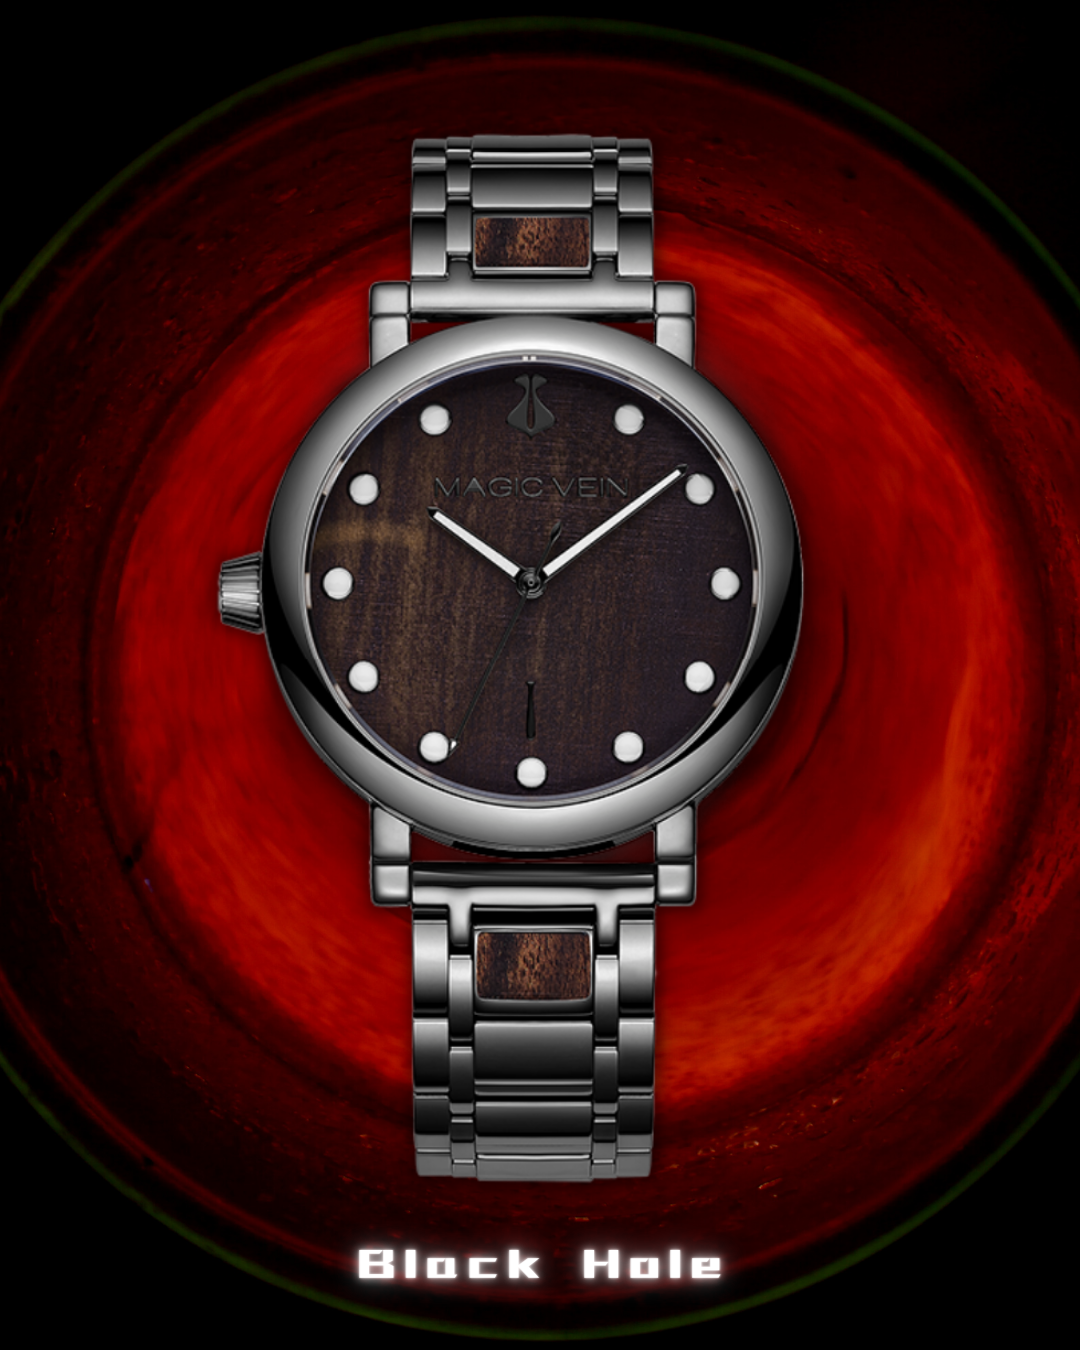 Discover watches you've never seen before. Magic vein offers the most unique and cool watches made by wood, jasper and opal. Shop for both men's watches and women's watches.